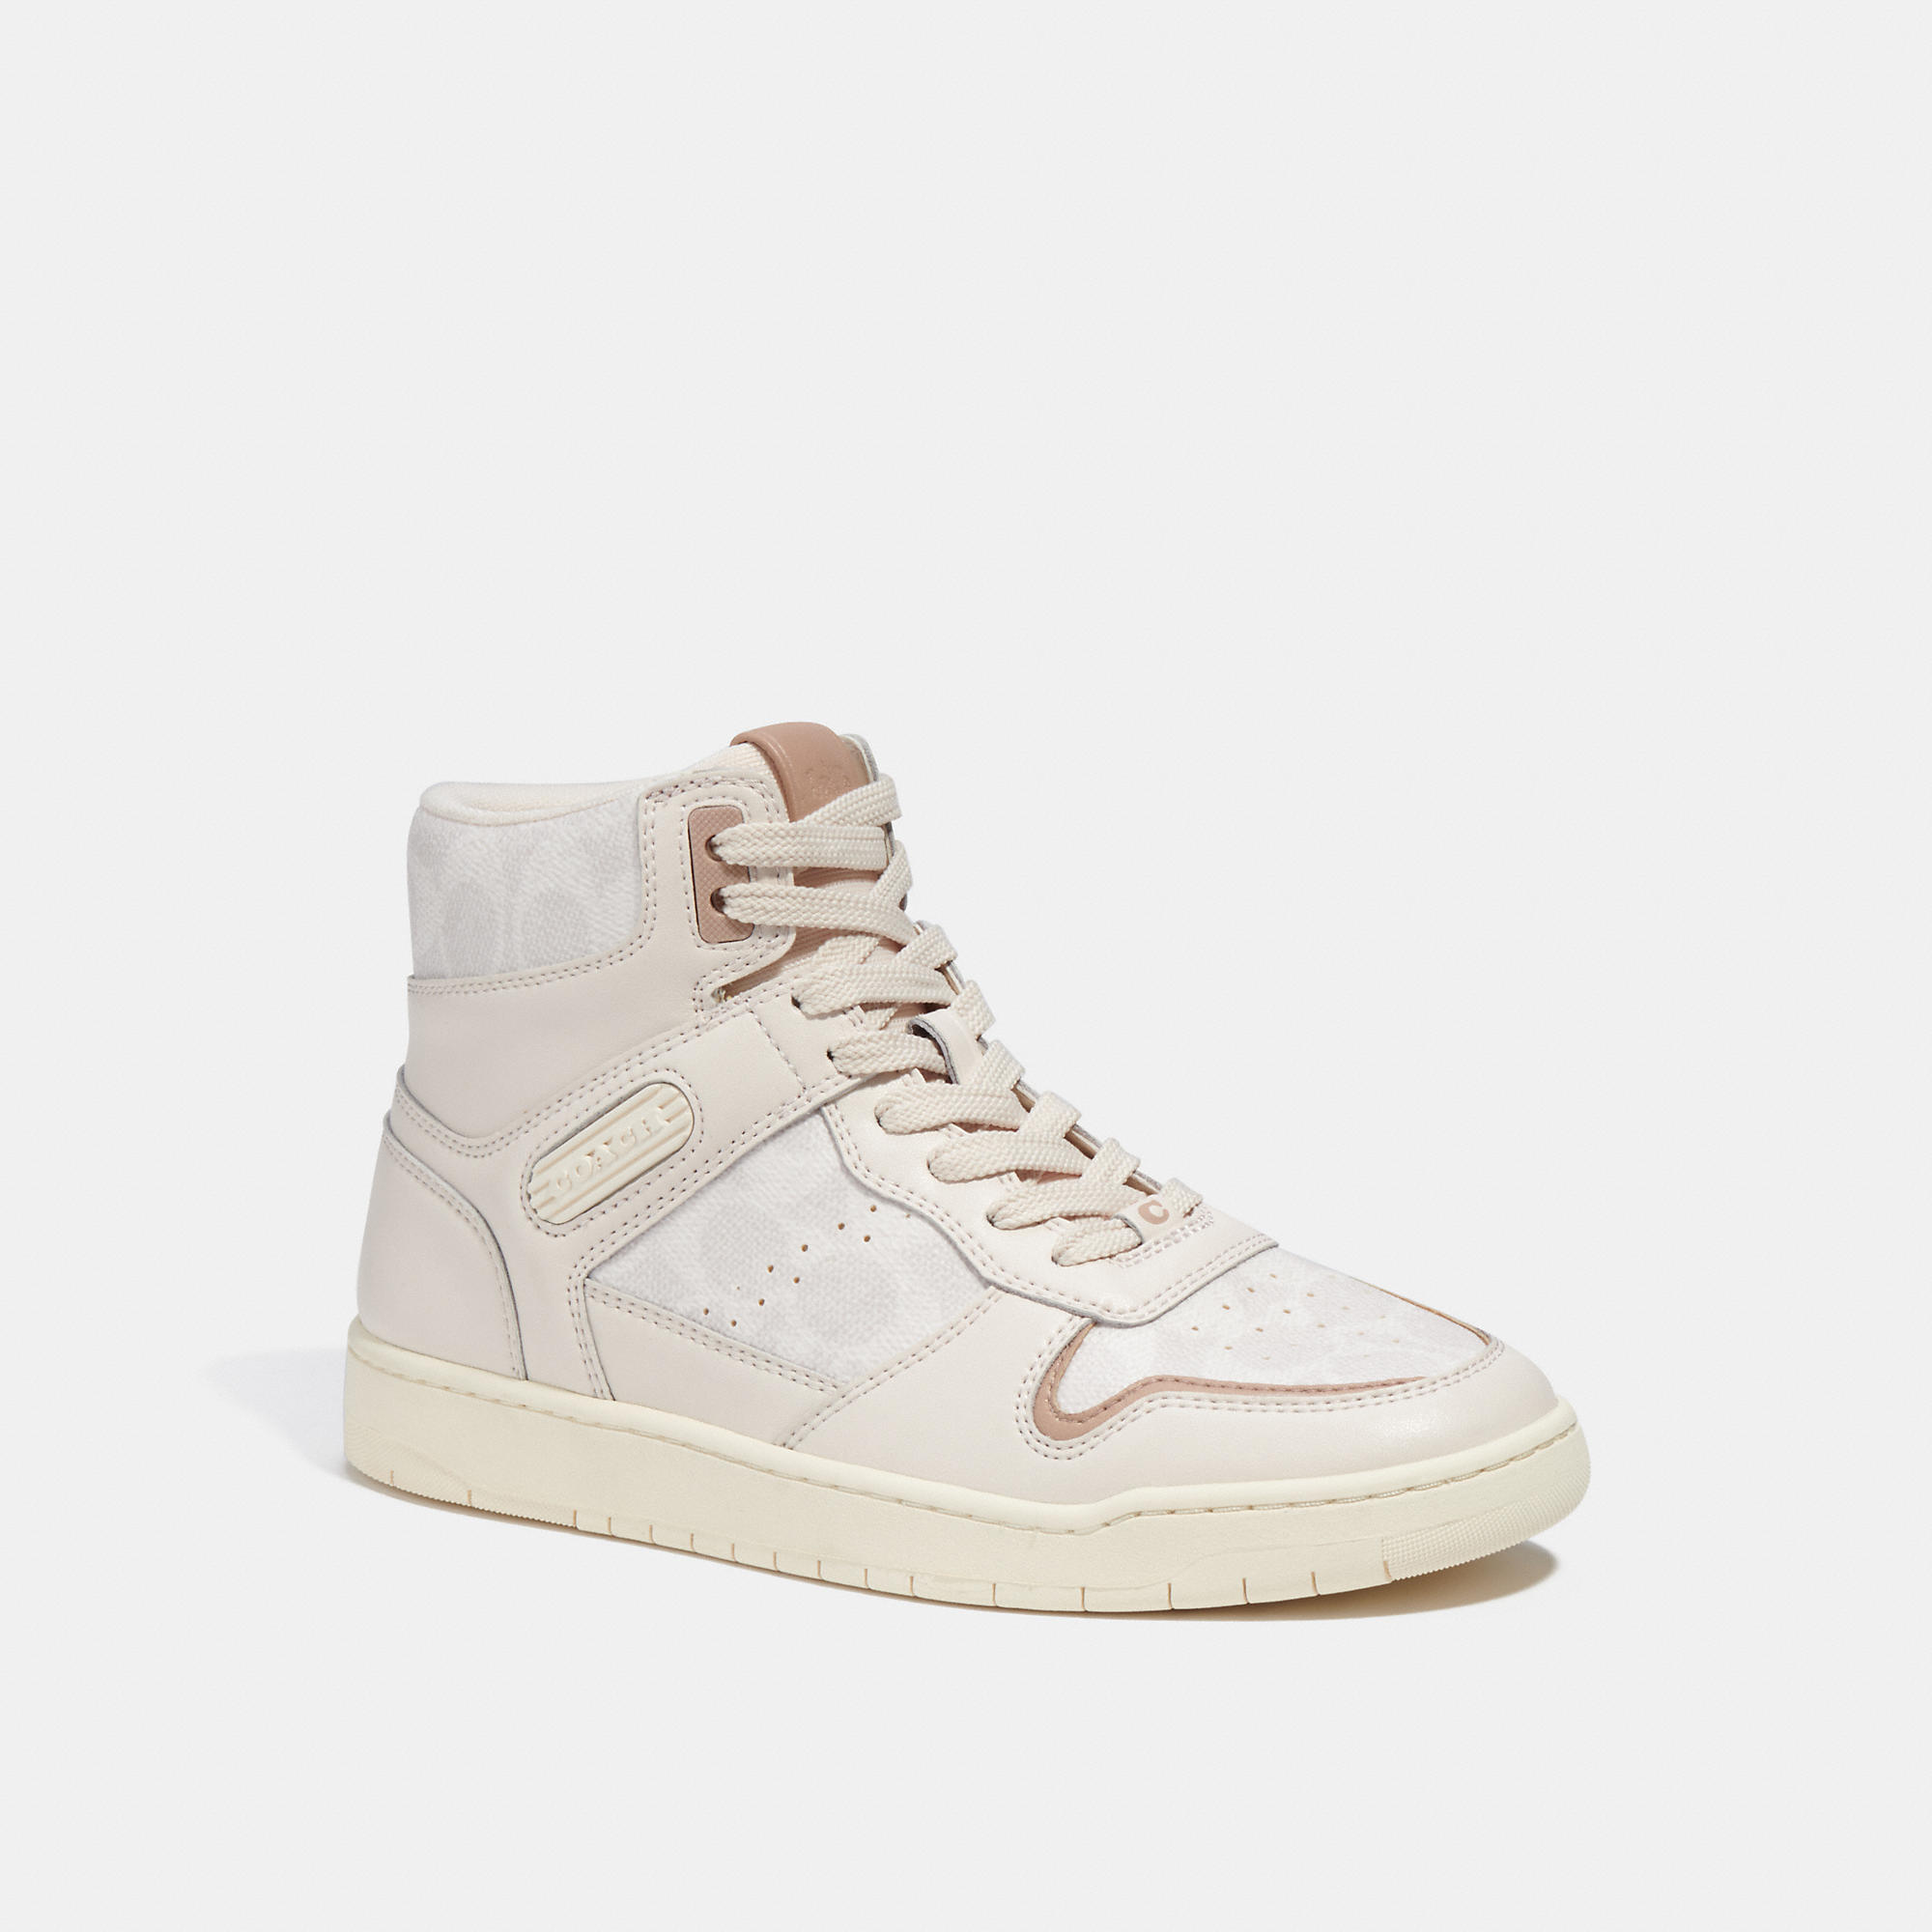 Coach Outlet High Top Sneaker In Signature Canvas In White